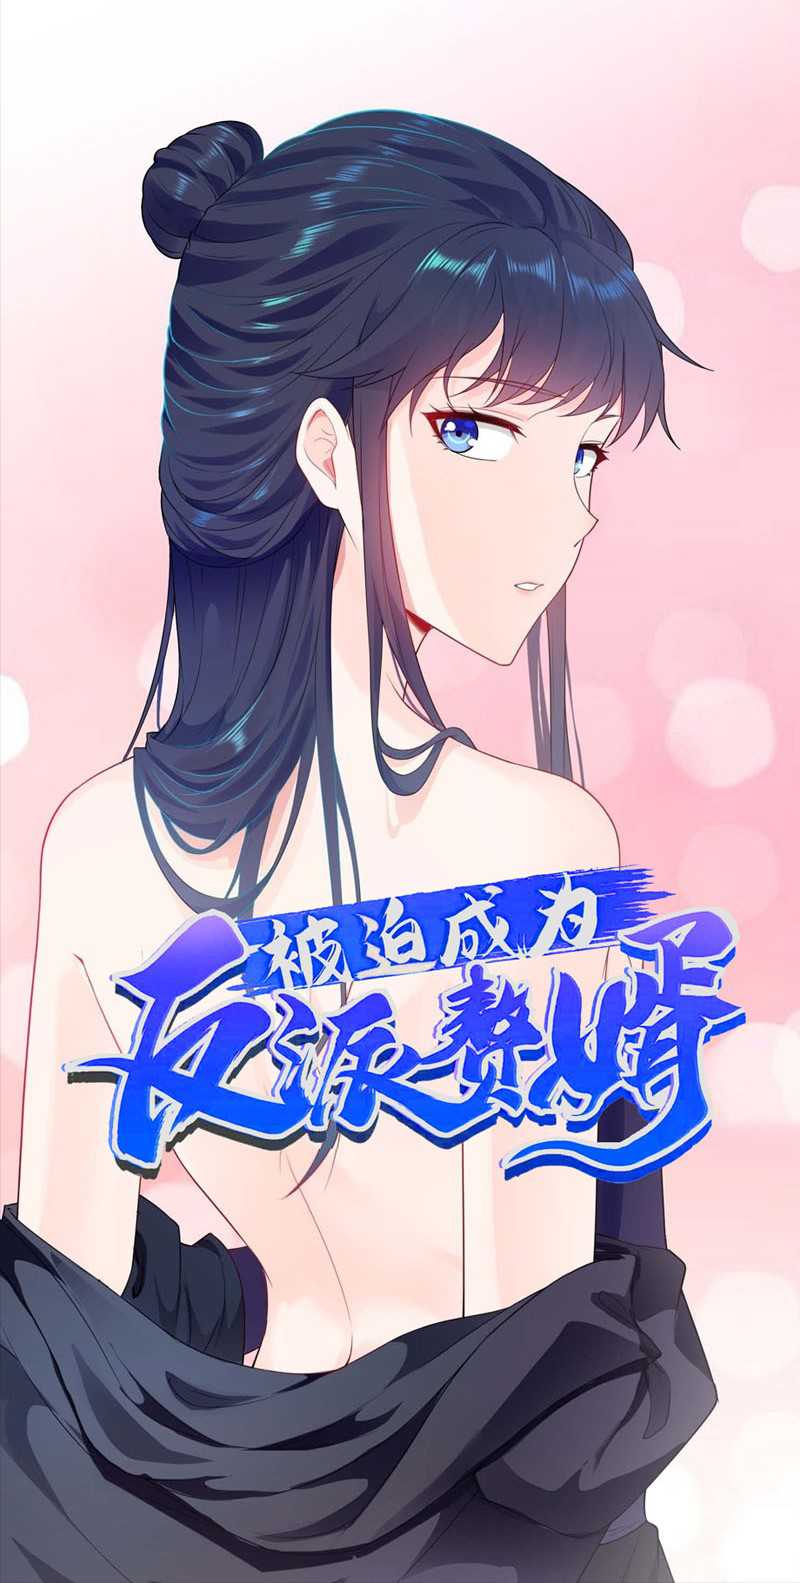 Forced to Become the Villain&#039;s Son-In-Law Chapter 48